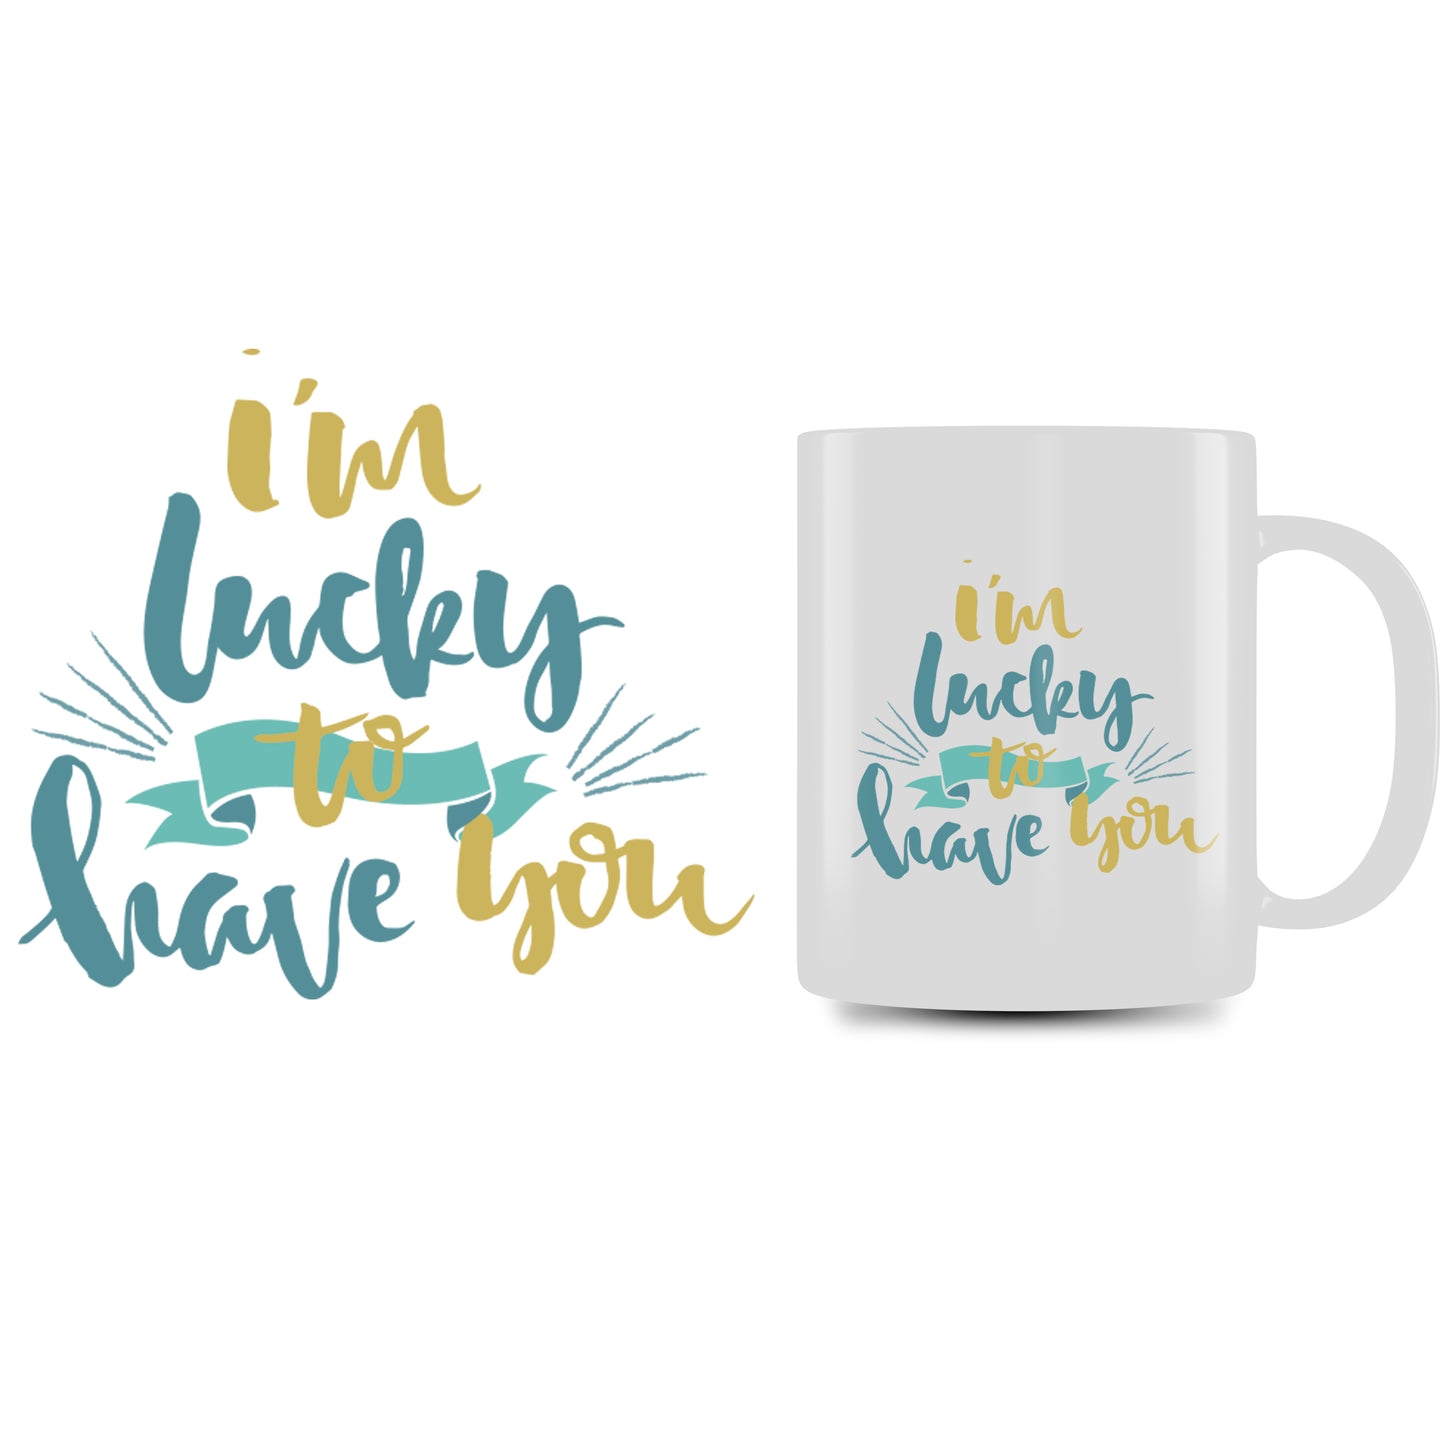 Personalized Mug (I'm lucky to have you)